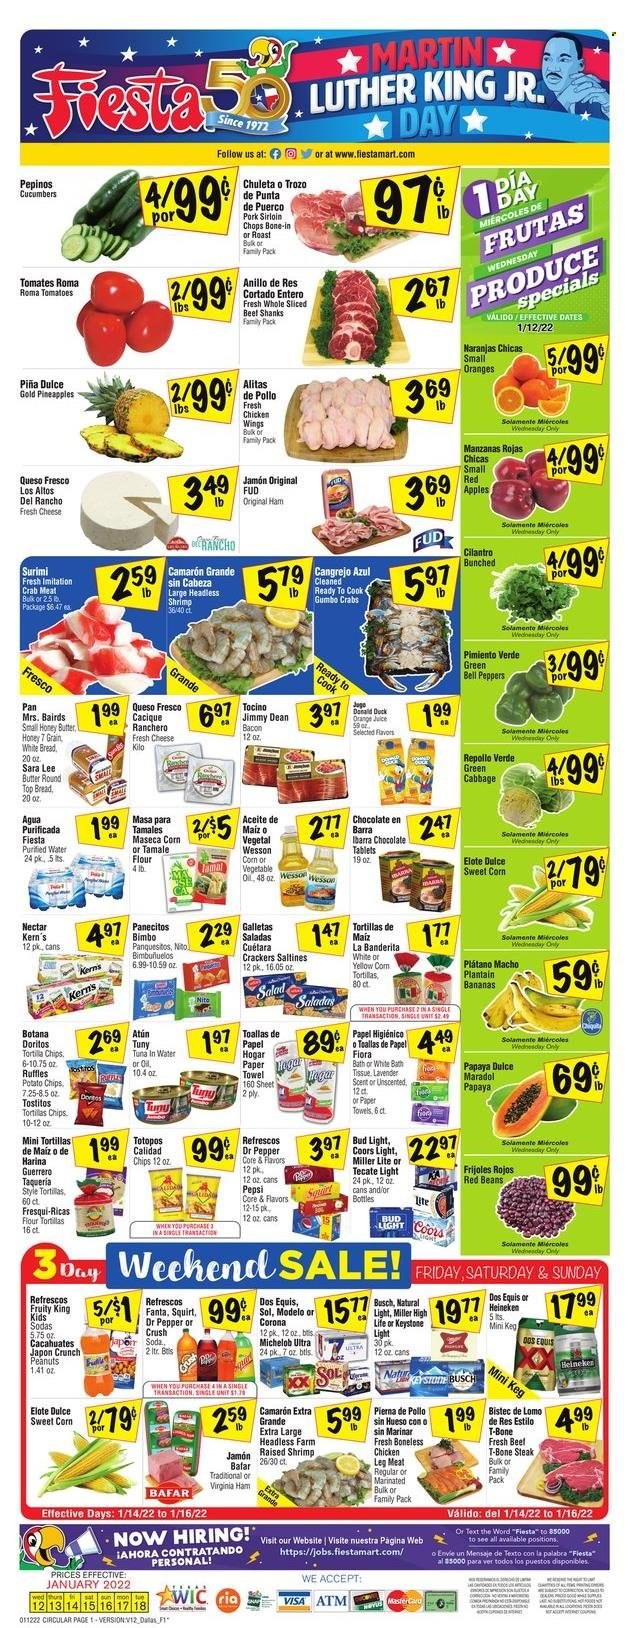 thumbnail - Fiesta Mart Flyer - 01/12/2022 - 01/18/2022 - Sales products - white bread, Sara Lee, flour tortillas, beans, bell peppers, cabbage, cucumber, tomatoes, salad, peppers, sweet corn, apples, bananas, pineapple, papaya, crab meat, tuna, crab, shrimps, Jimmy Dean, bacon, ham, virginia ham, queso fresco, cheese, butter, chicken wings, chocolate, crackers, Doritos, tortilla chips, potato chips, chips, saltines, Ruffles, Tostitos, red beans, tuna in water, cilantro, honey, peanuts, Pepsi, orange juice, juice, Fanta, Dr. Pepper, Kern's, soda, purified water, beer, Busch, Bud Light, Corona Extra, Heineken, Sol, Keystone, Modelo, chicken legs, beef meat, t-bone steak, steak, pork loin, tissues, kitchen towels, paper towels, Miller Lite, Coors, Dos Equis, Michelob. Page 1.